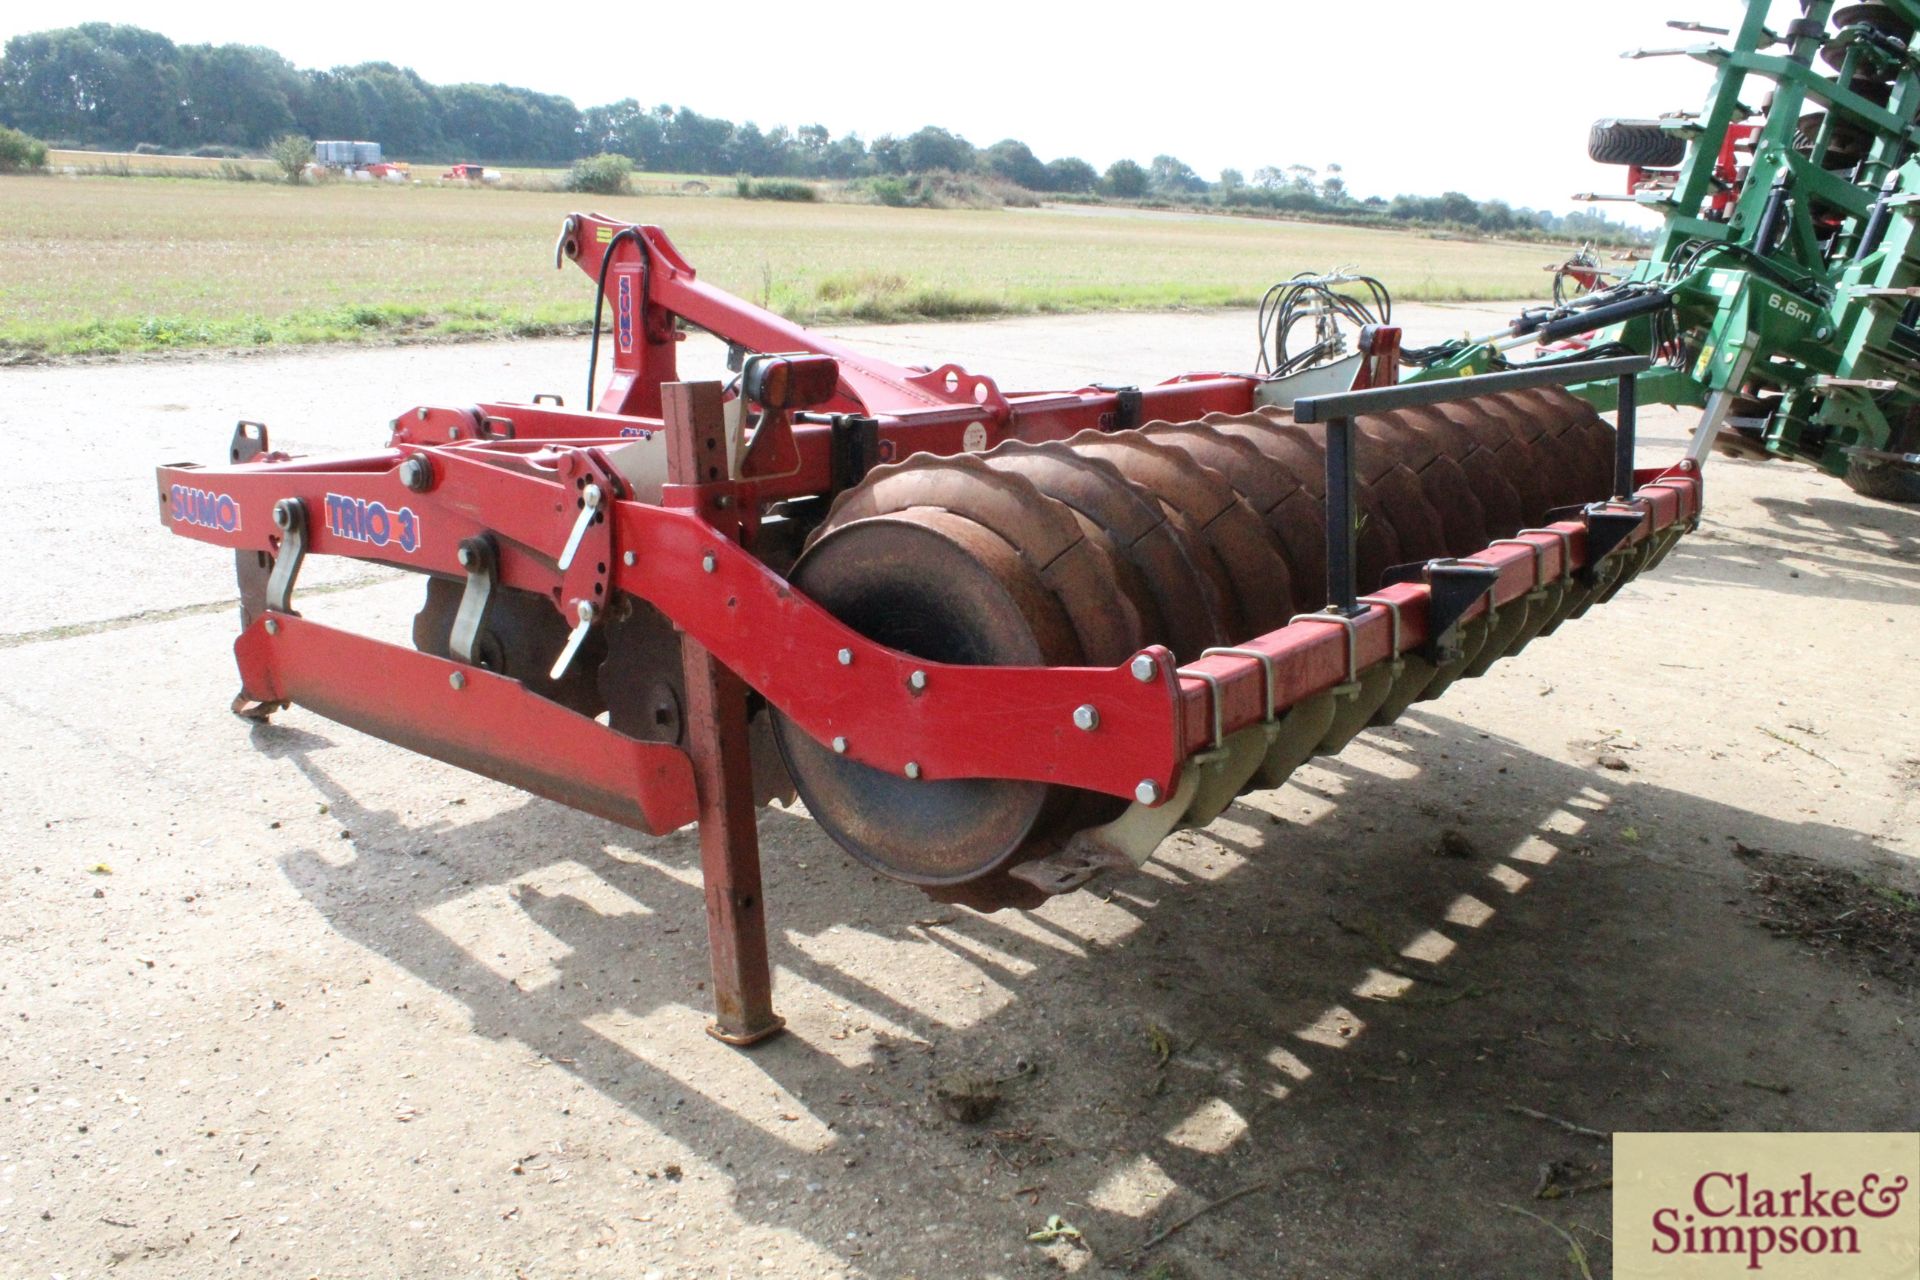 Sumo Trio 3 3m mounted cultivator 2012. Serial number 11626. With six Metcalfe low disturbance legs, - Image 3 of 21